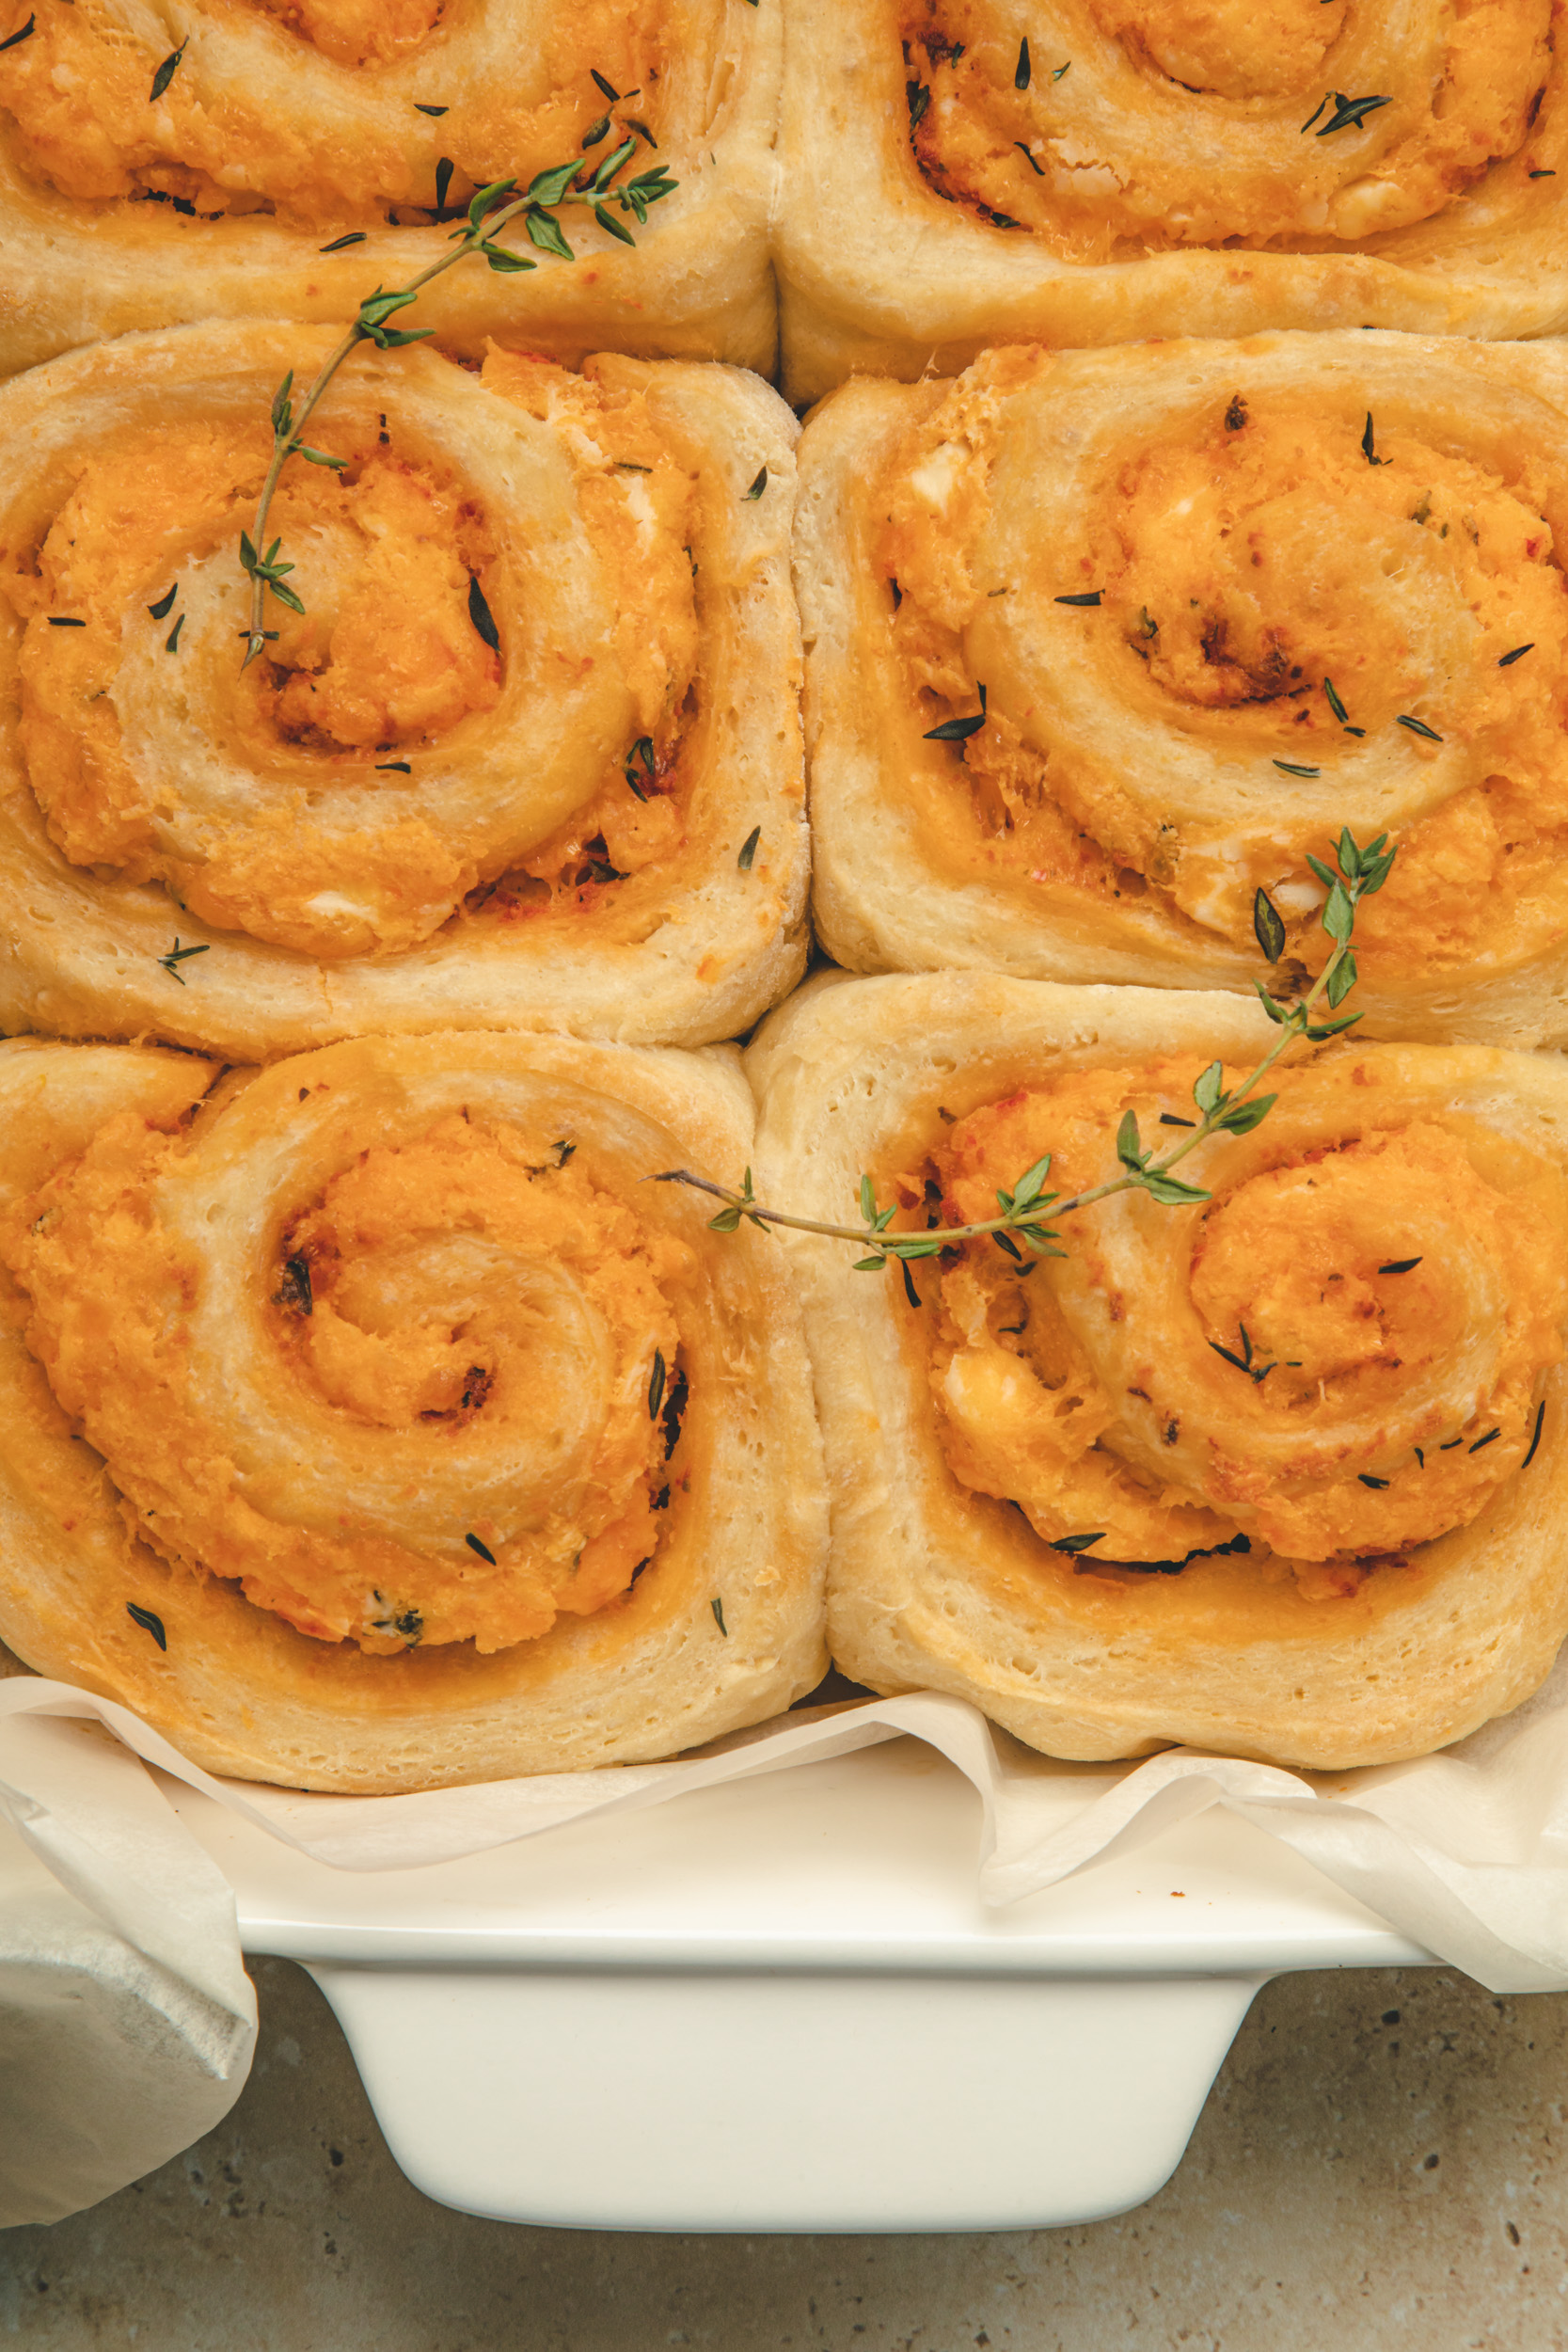 Overhead, close up view of Turkey Cheddar Swirl Buns garnished with thyme.